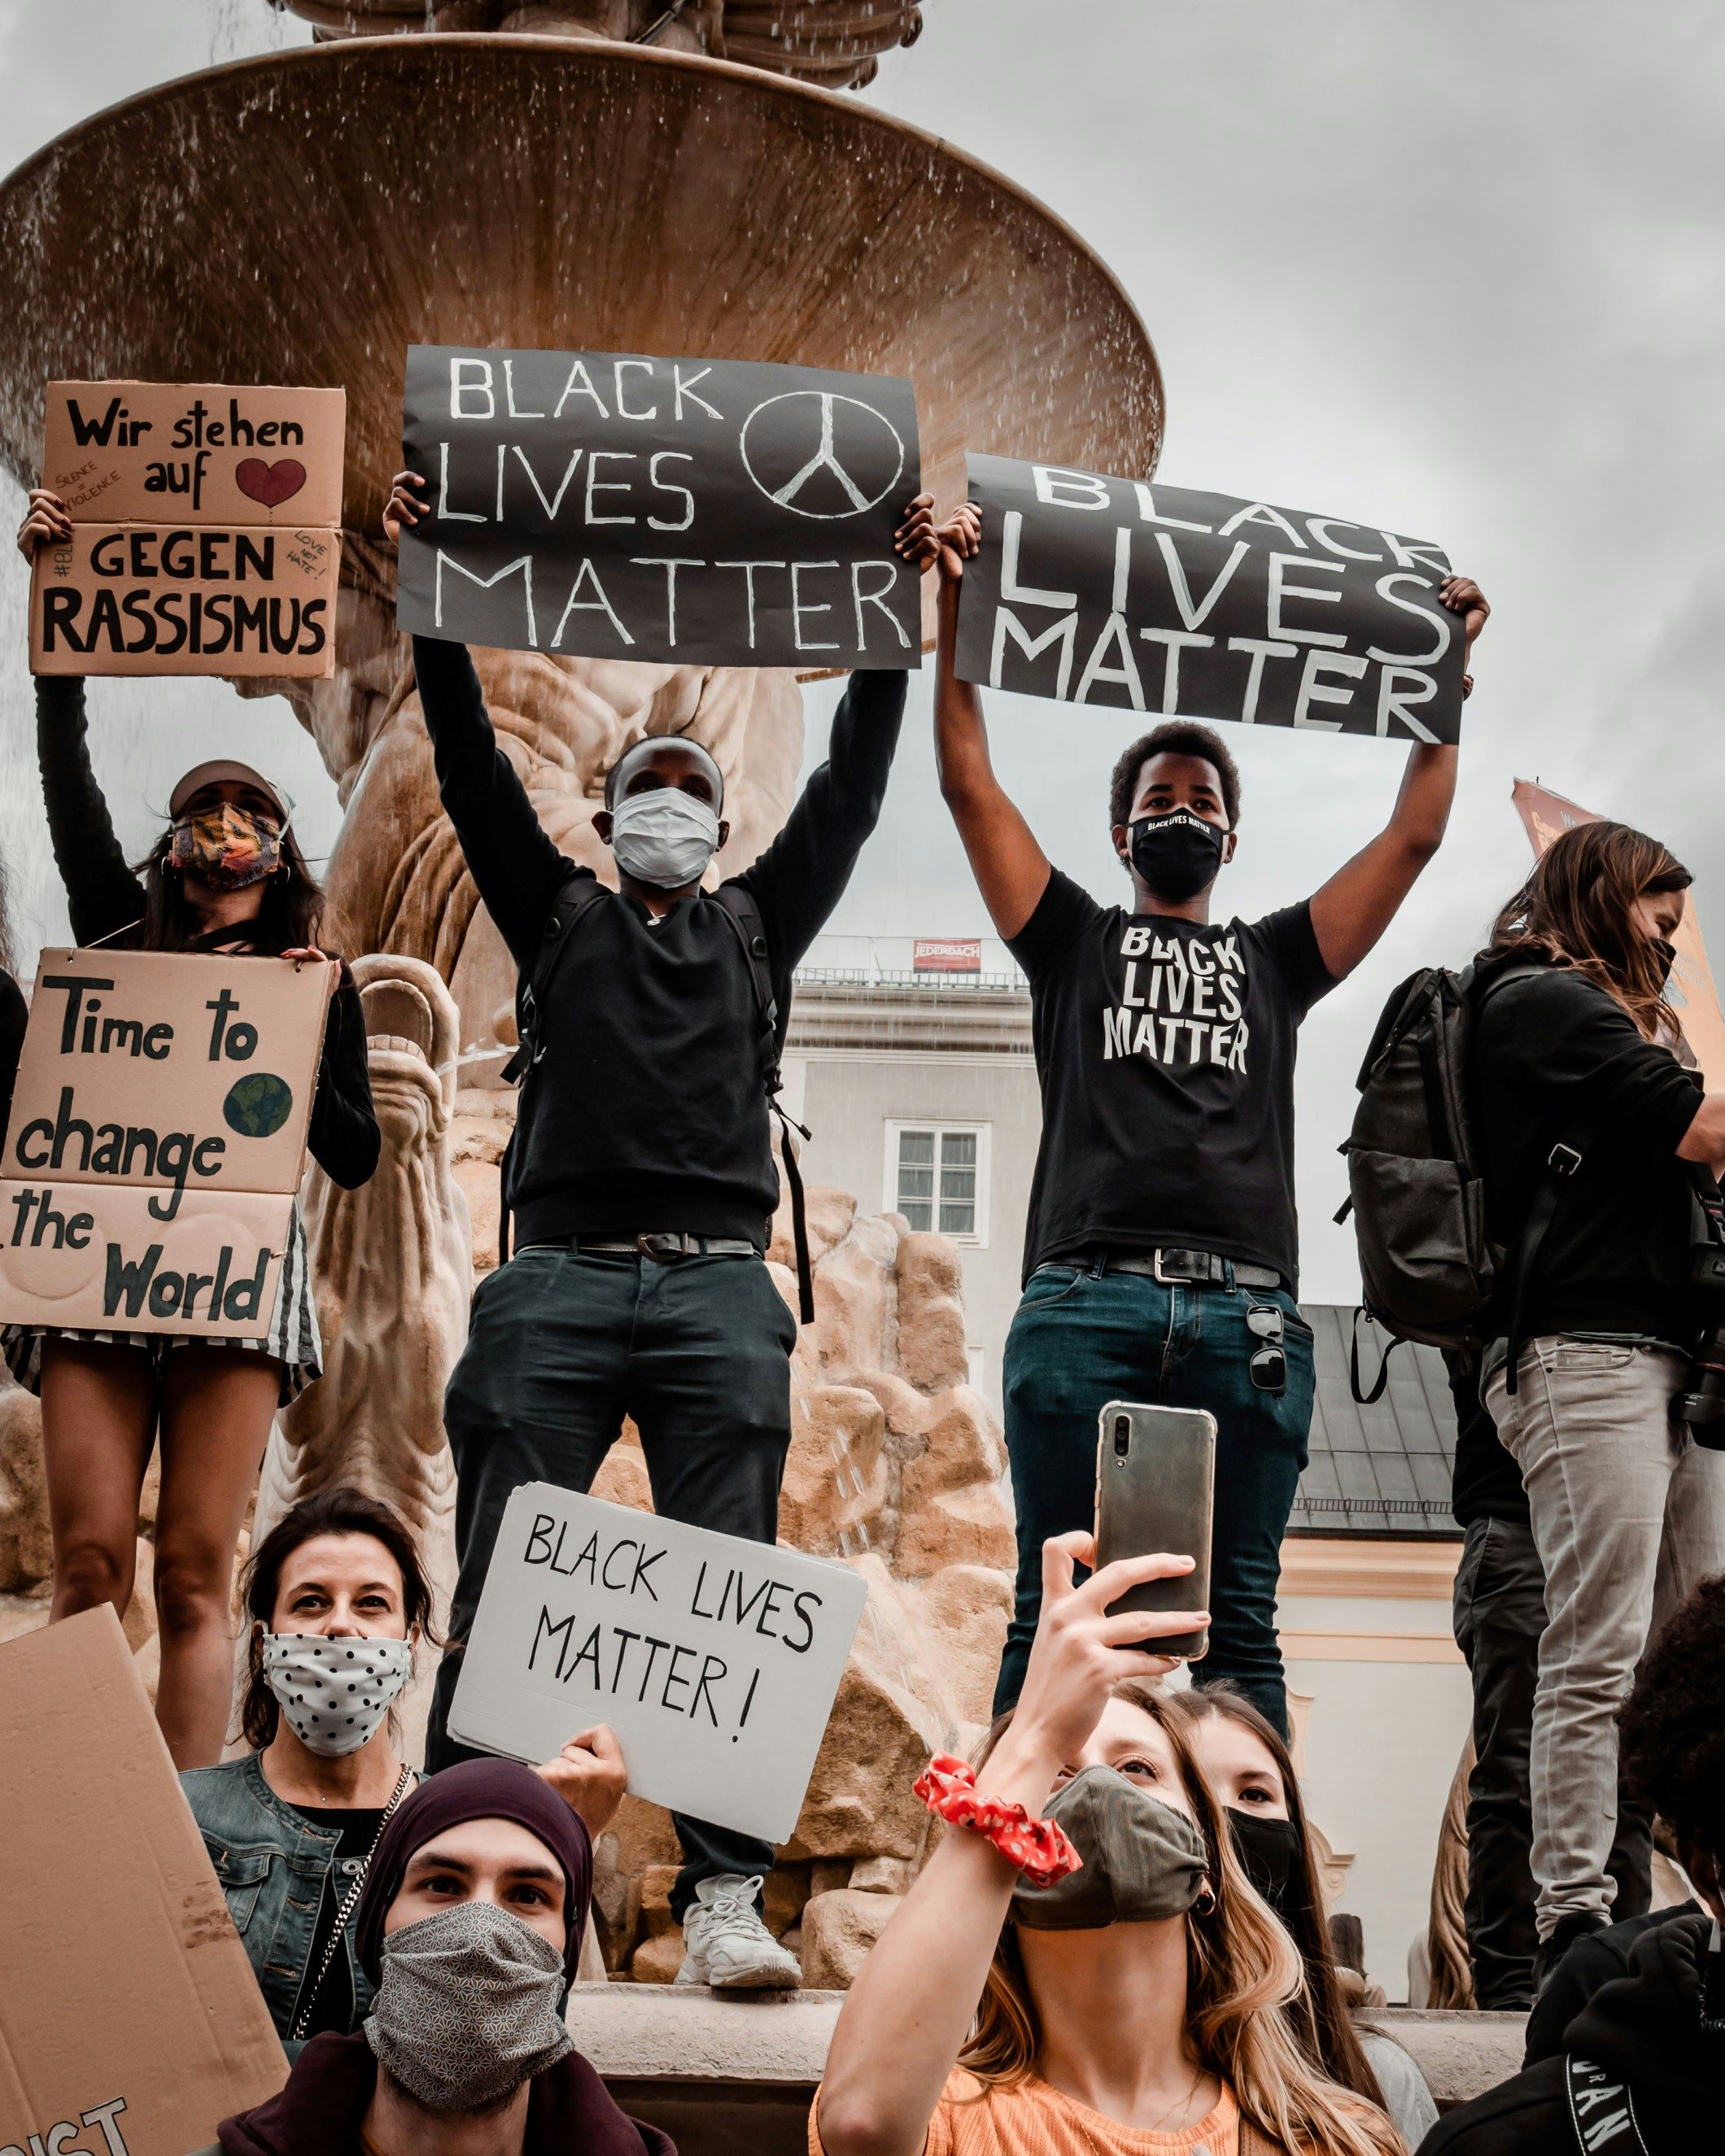 Five anti-racist demonstrators at a protest for racial justice, holding placards saying 'Black Lives Matter' and 'Time to change the world'. 